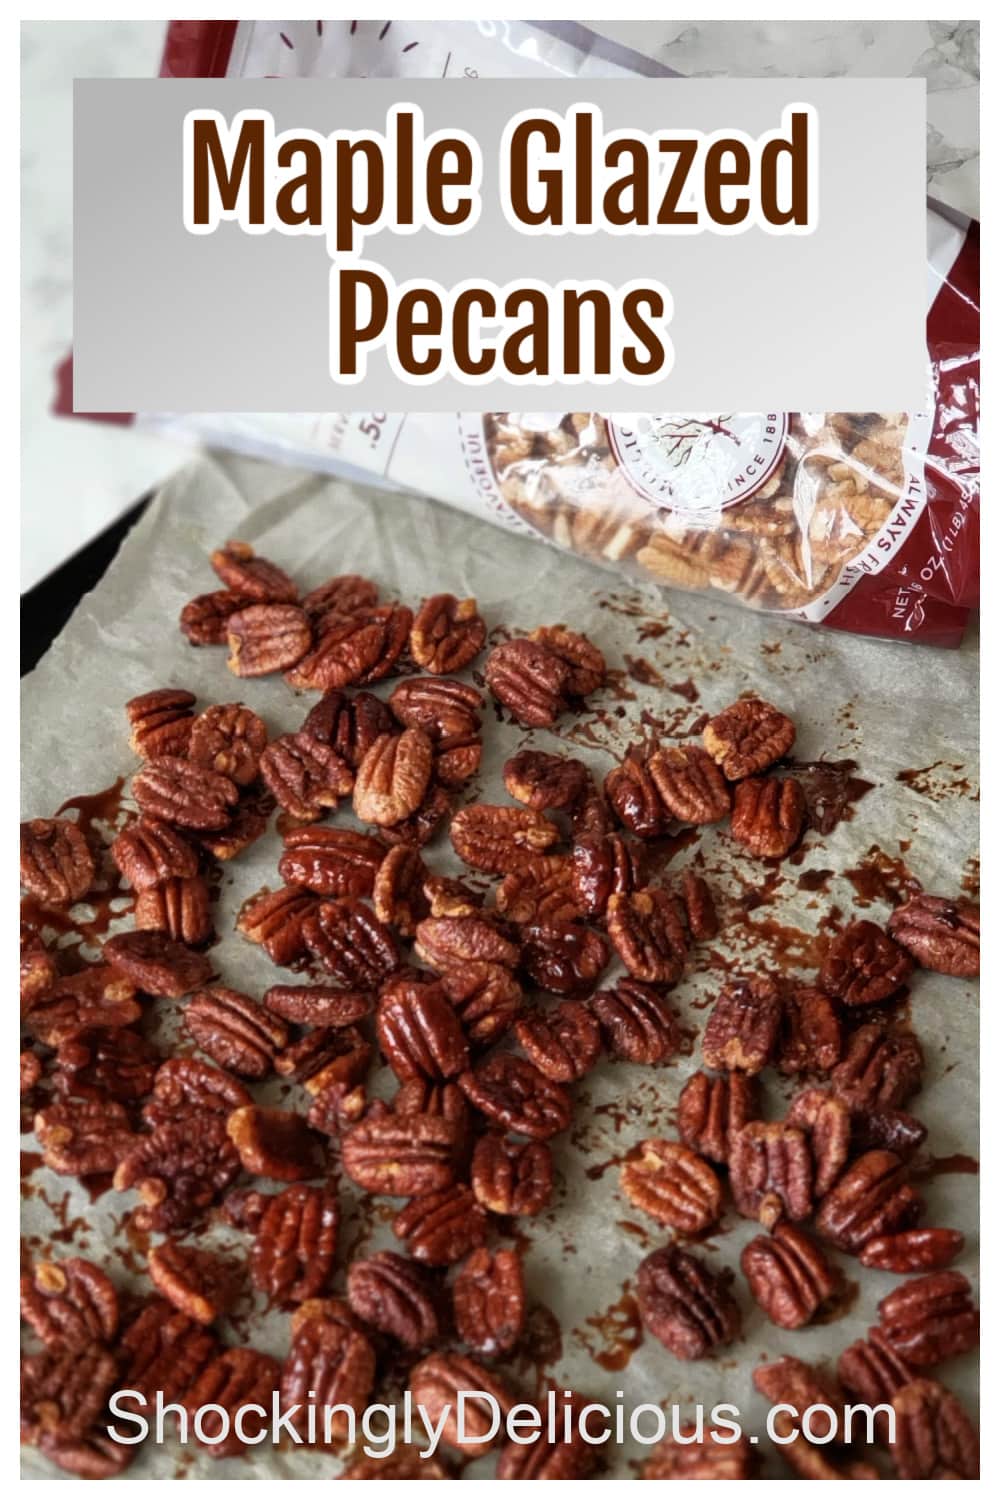 Pecans on parchment paper on a baking sheet, with the recipe title superimposed on top 